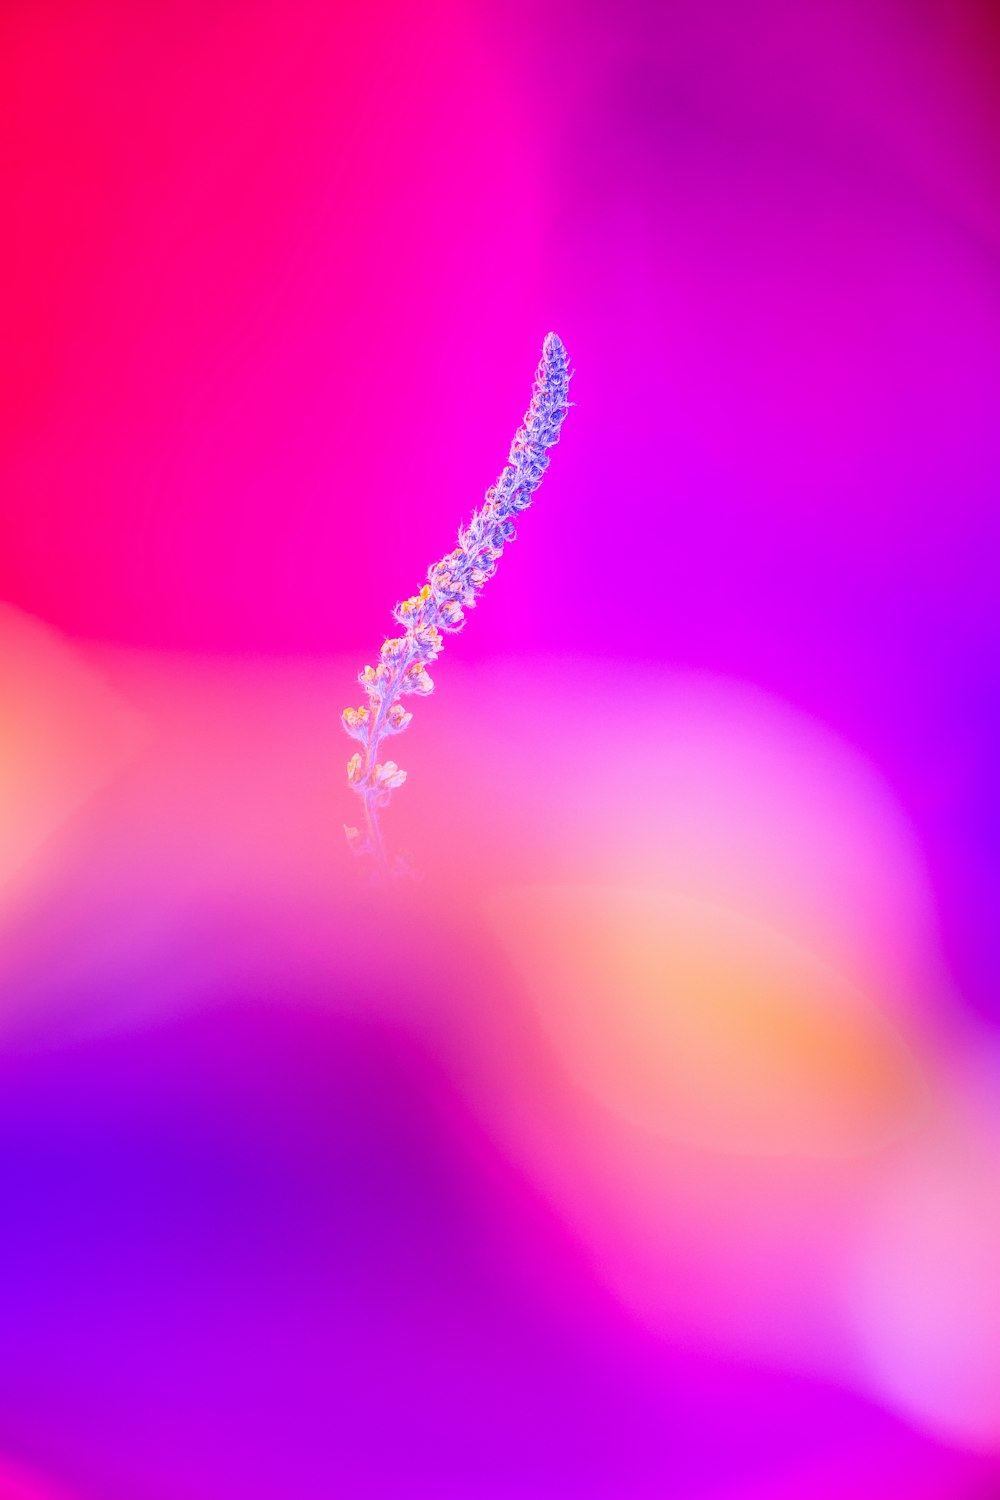 water droplets on pink background